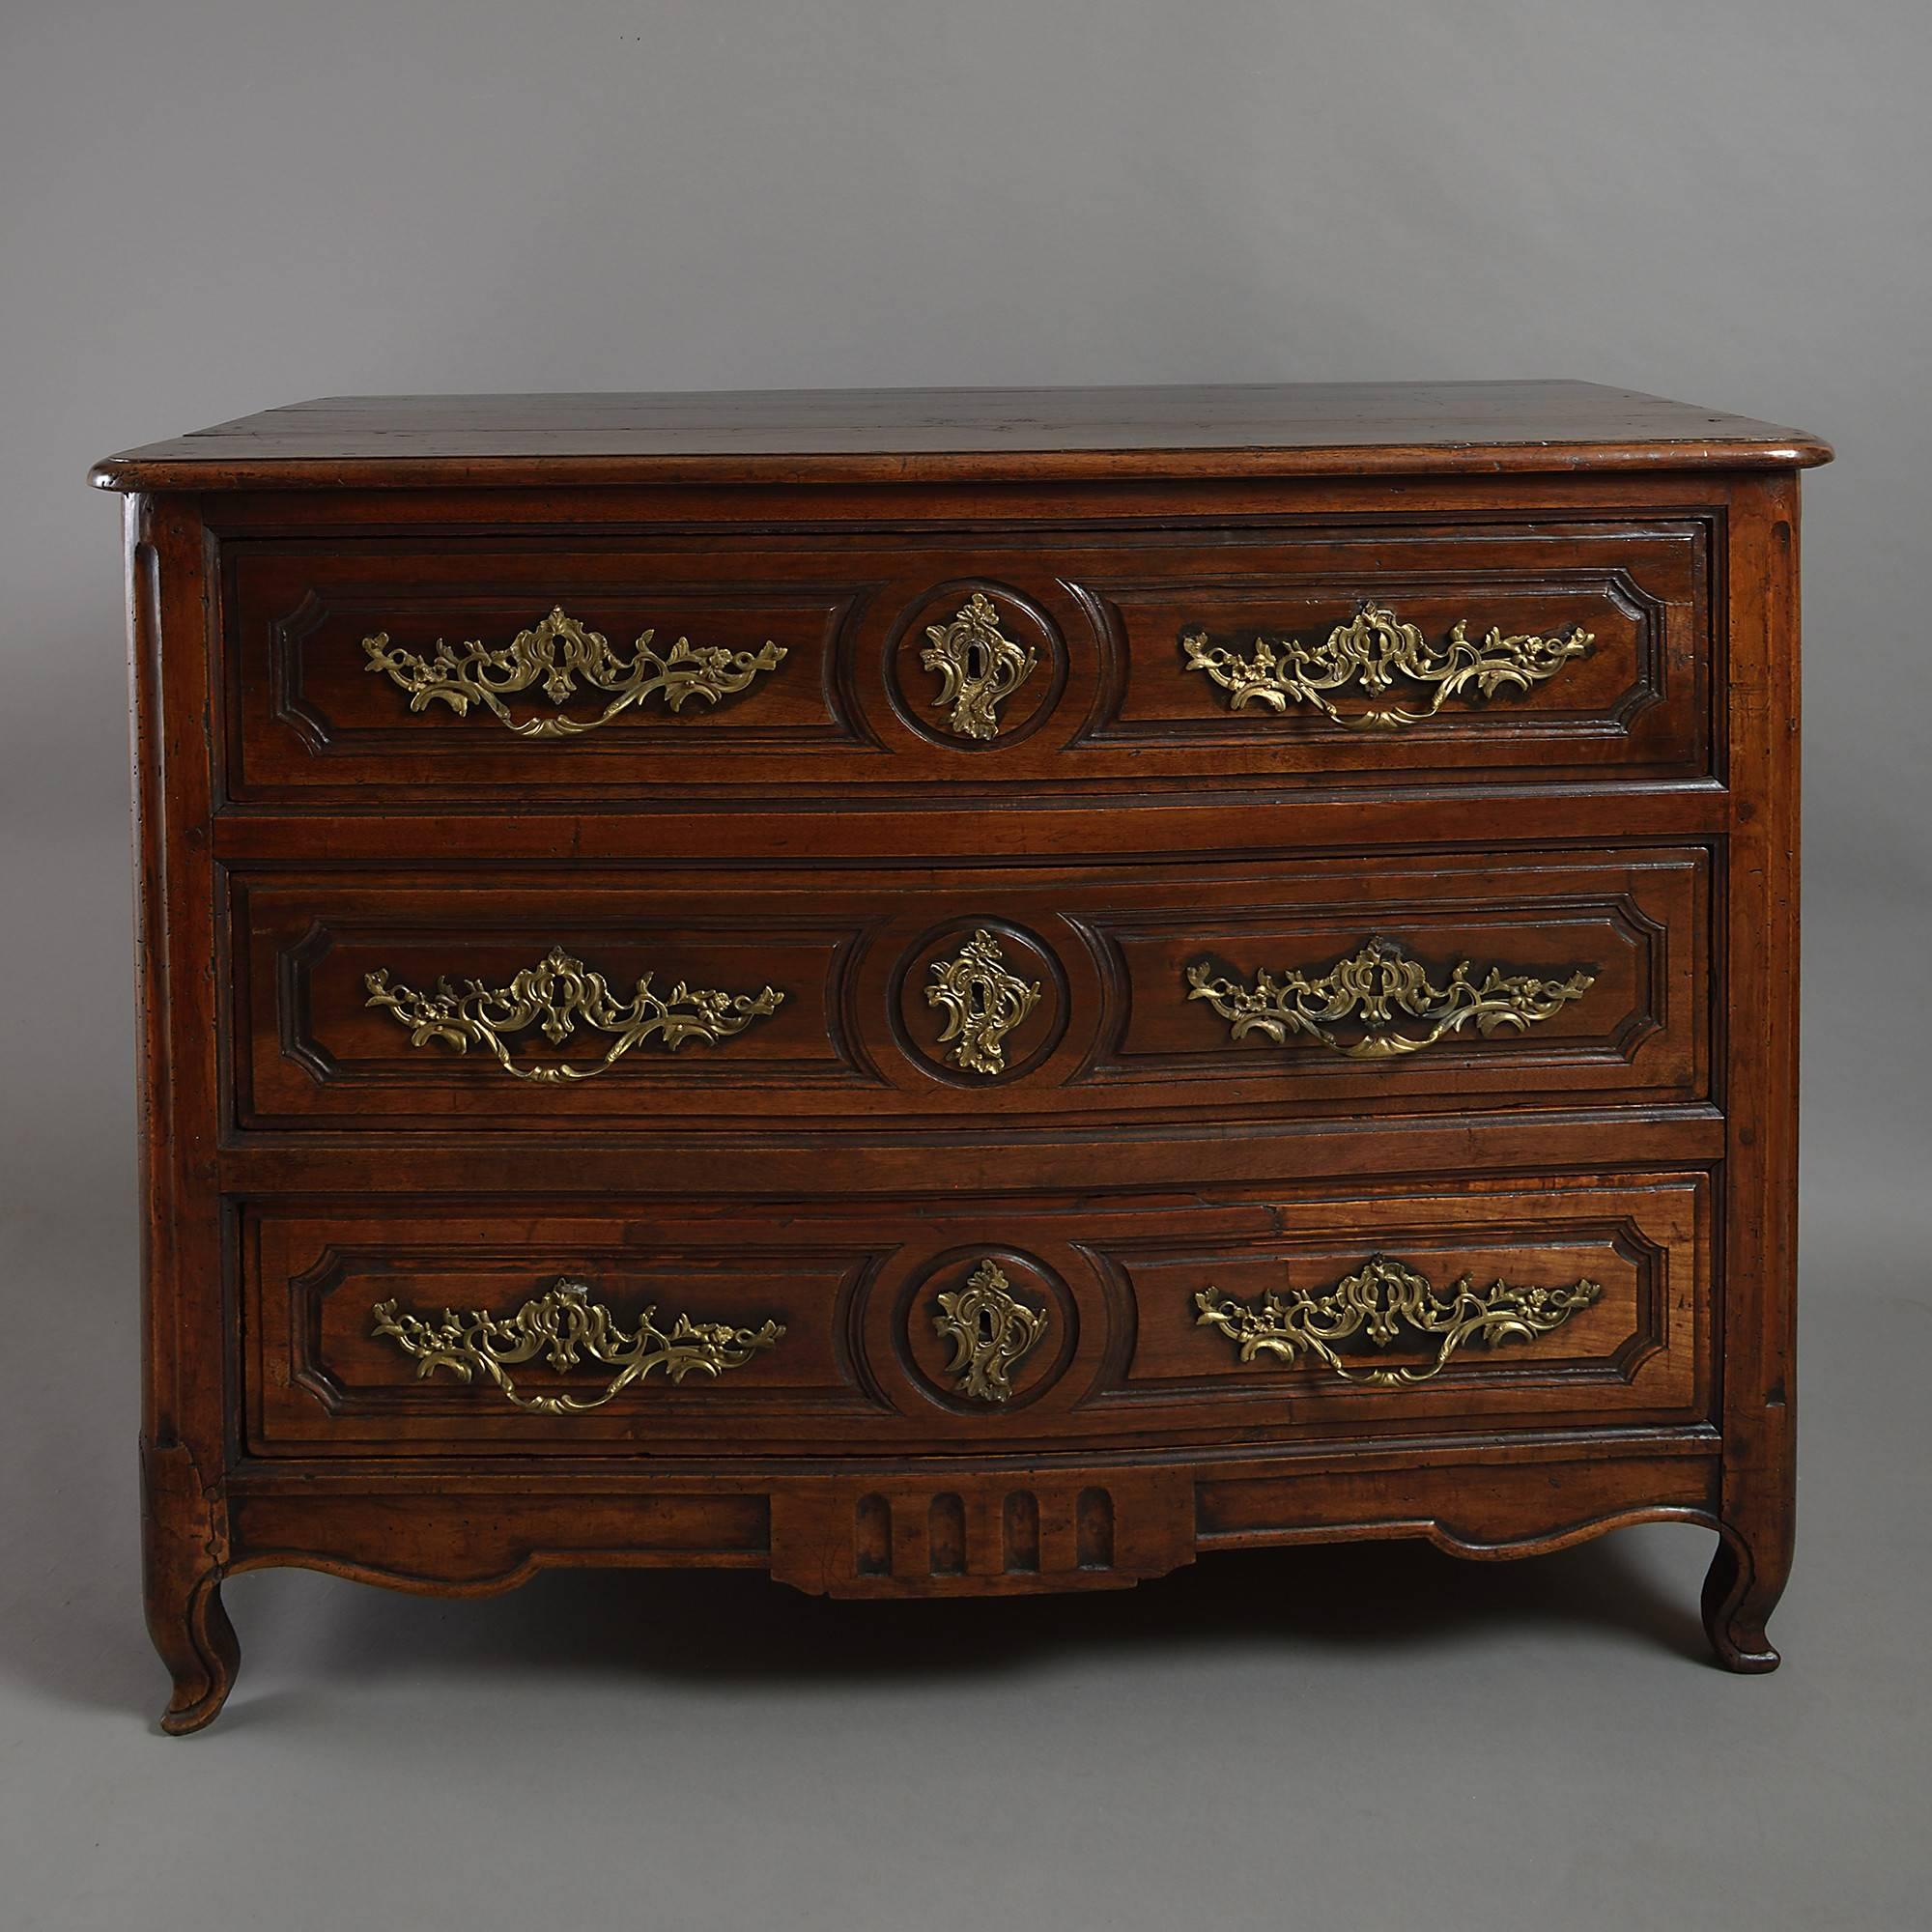 An early 18th century walnut commode, the overhanging top above three panelled drawers, each with later finely chased brass Rococo handles, the sides having arched panels, all set upon a shaped apron terminating in scrolling feet.